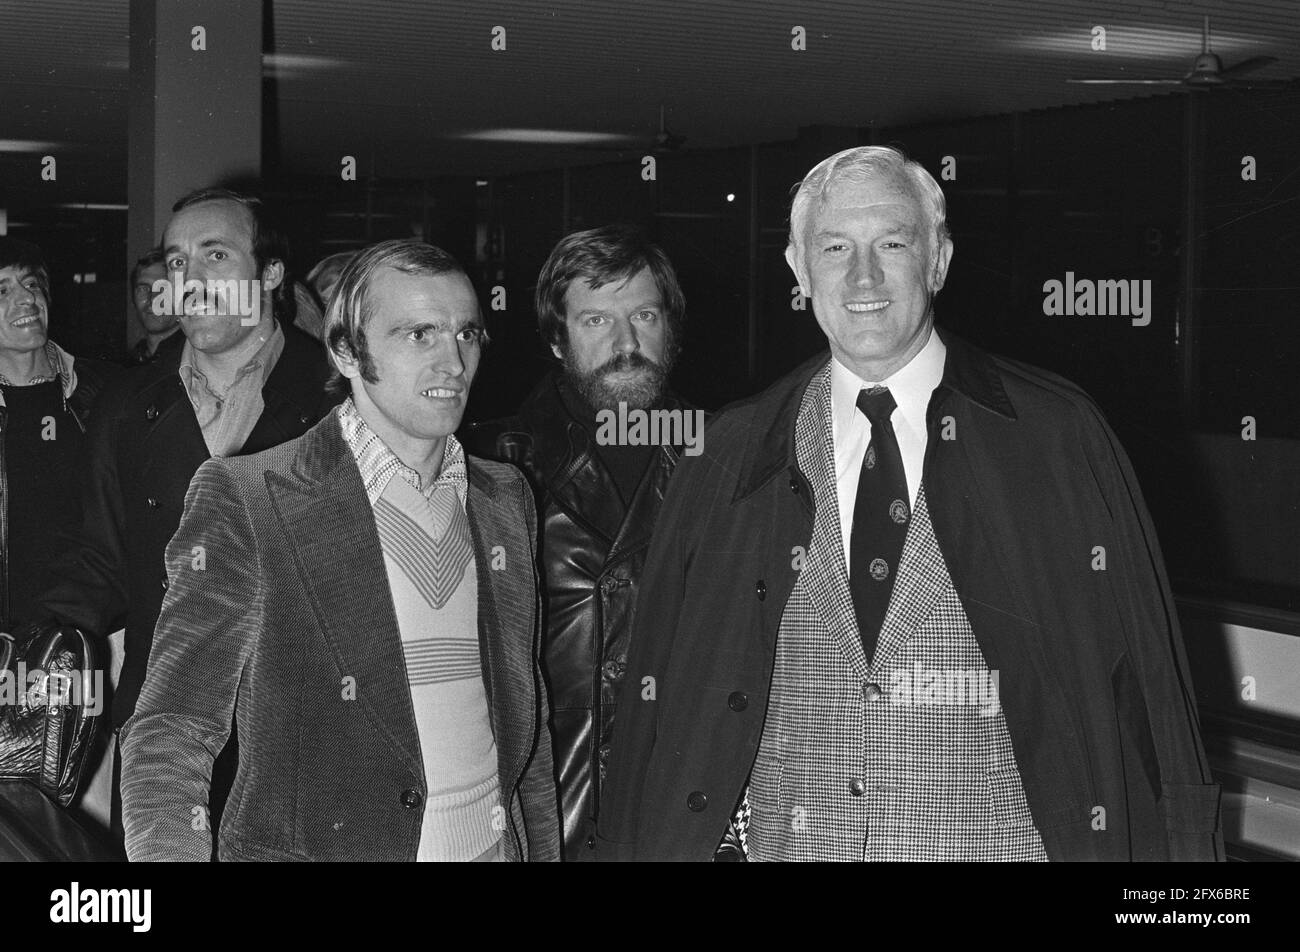 Herta BSC arrived at Schiphol airport for match against Ajax; top scorer Erich Beer (left) with trainer Kessler, November 3, 1975, trainers, matches, The Netherlands, 20th century press agency photo, news to remember, documentary, historic photography 1945-1990, visual stories, human history of the Twentieth Century, capturing moments in time Stock Photo